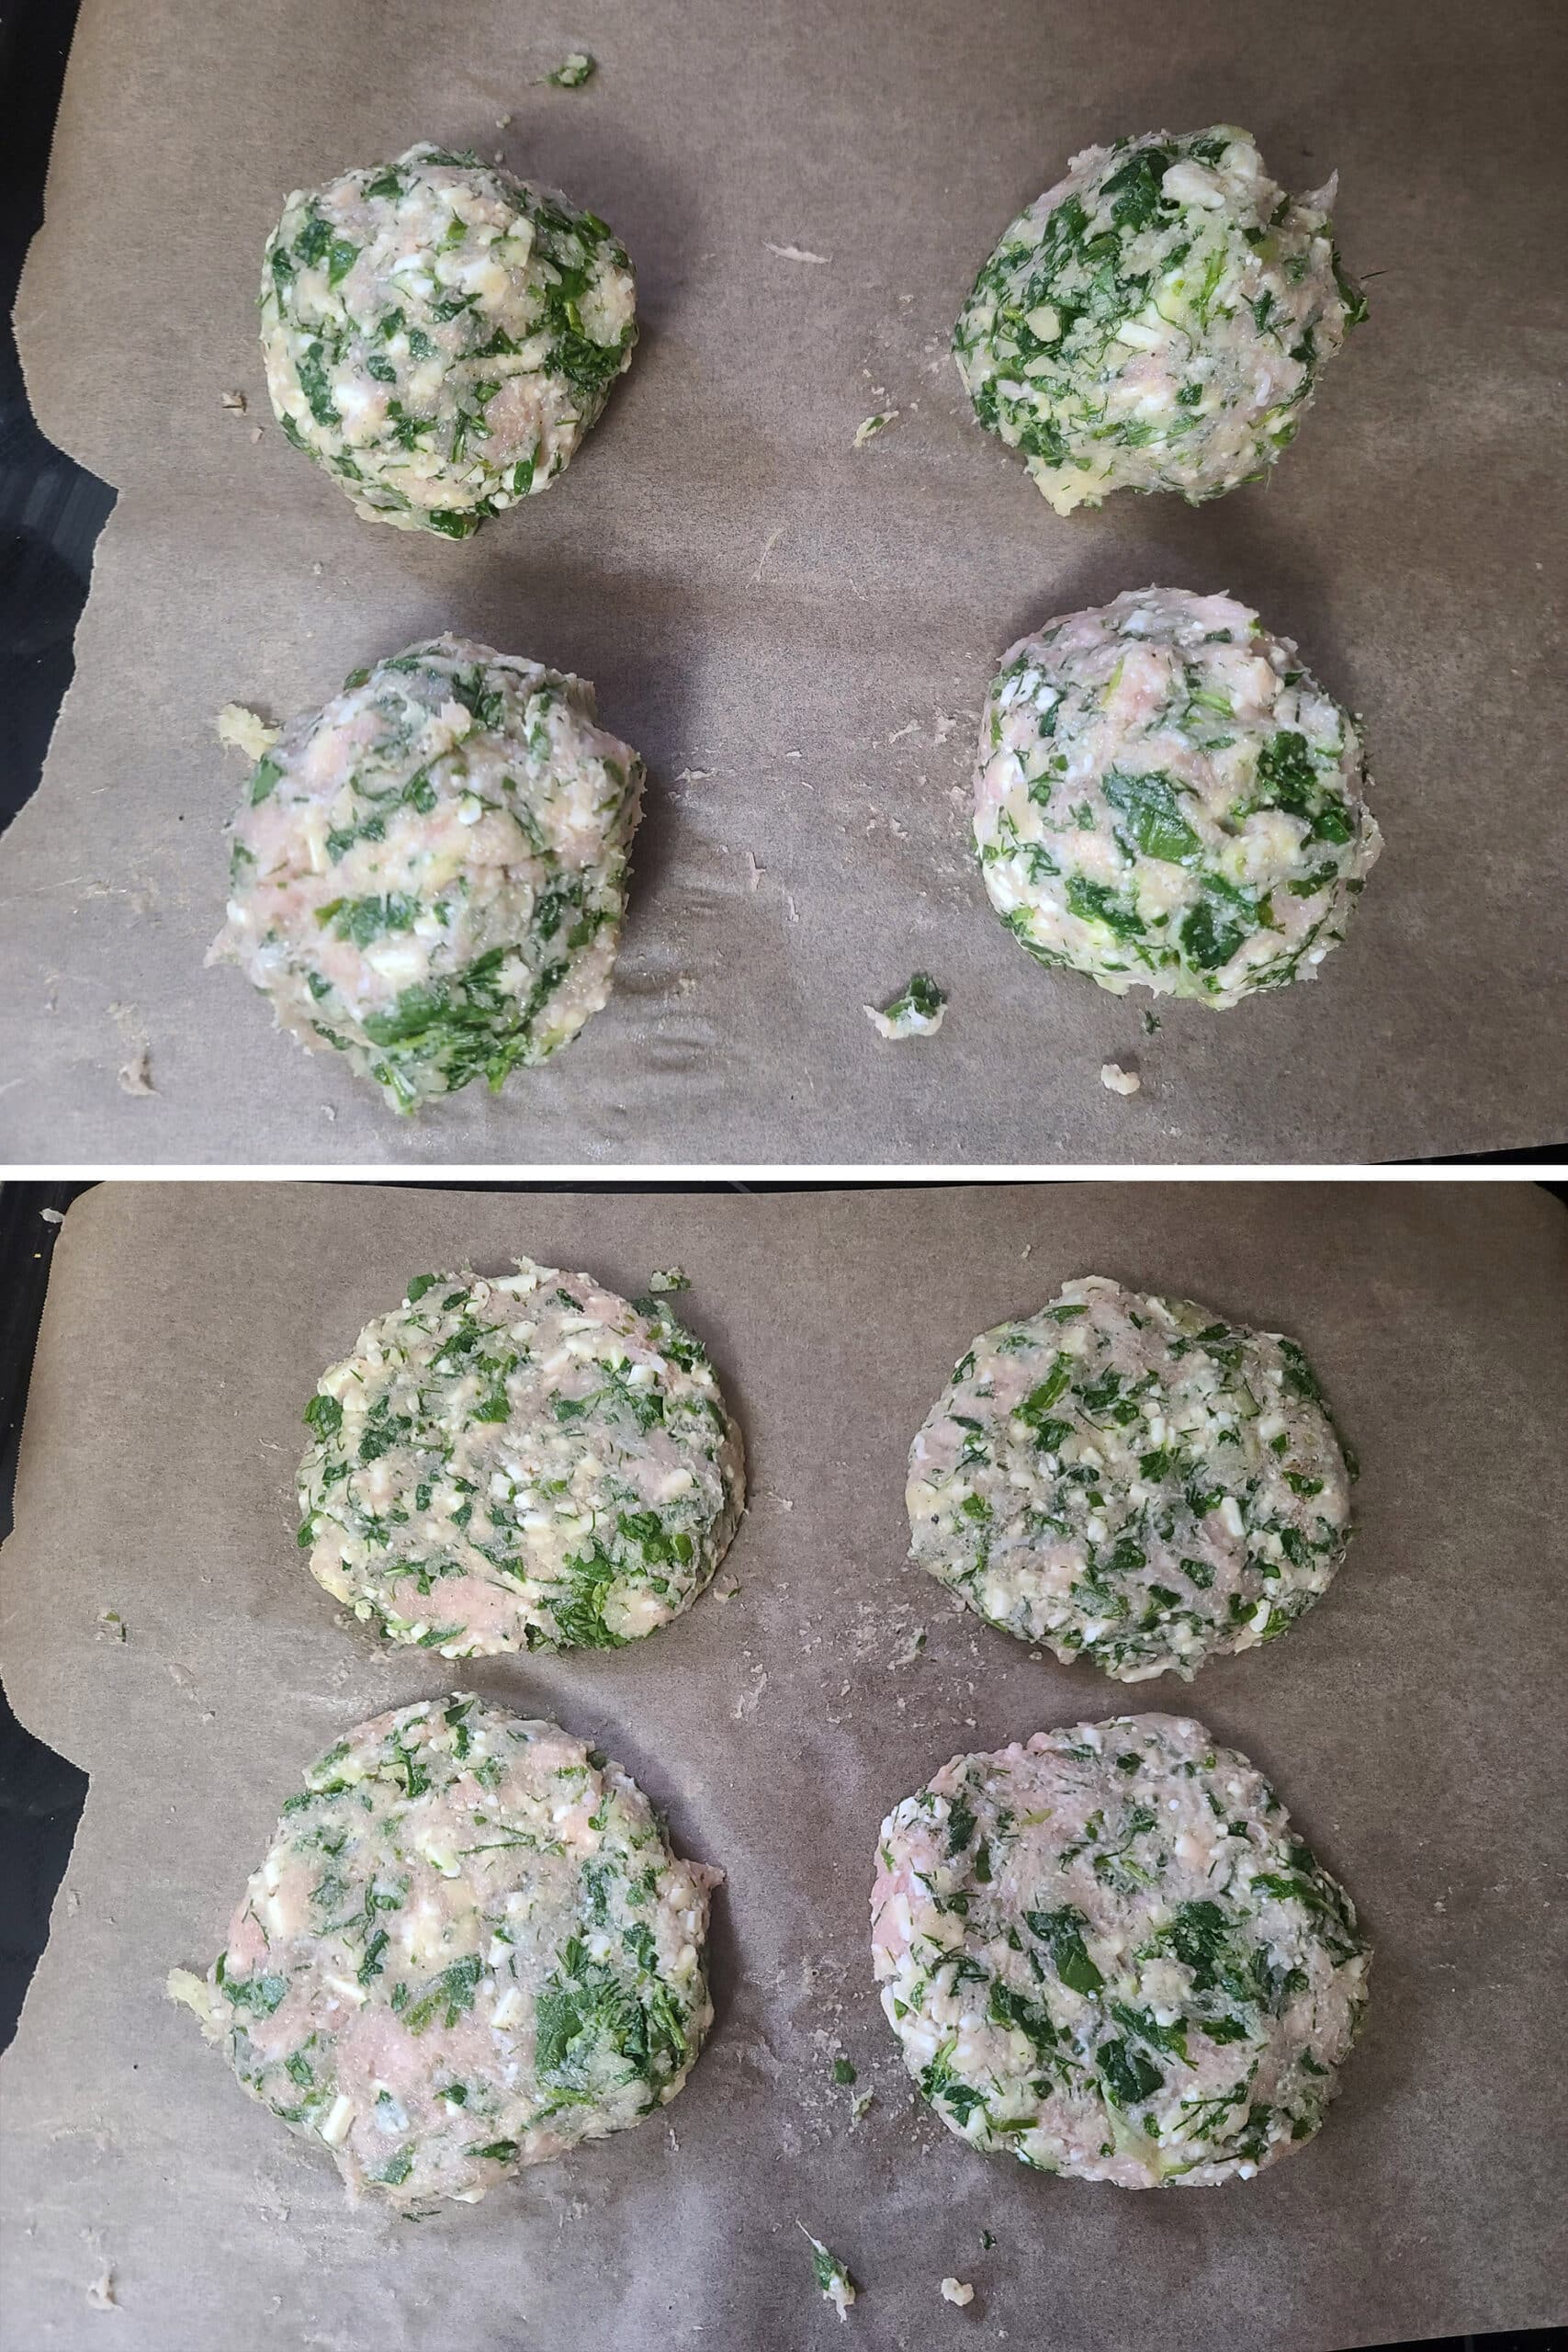 A 2 part image showing the chicken burger mix being divided into 4 balls, then formed into patties.